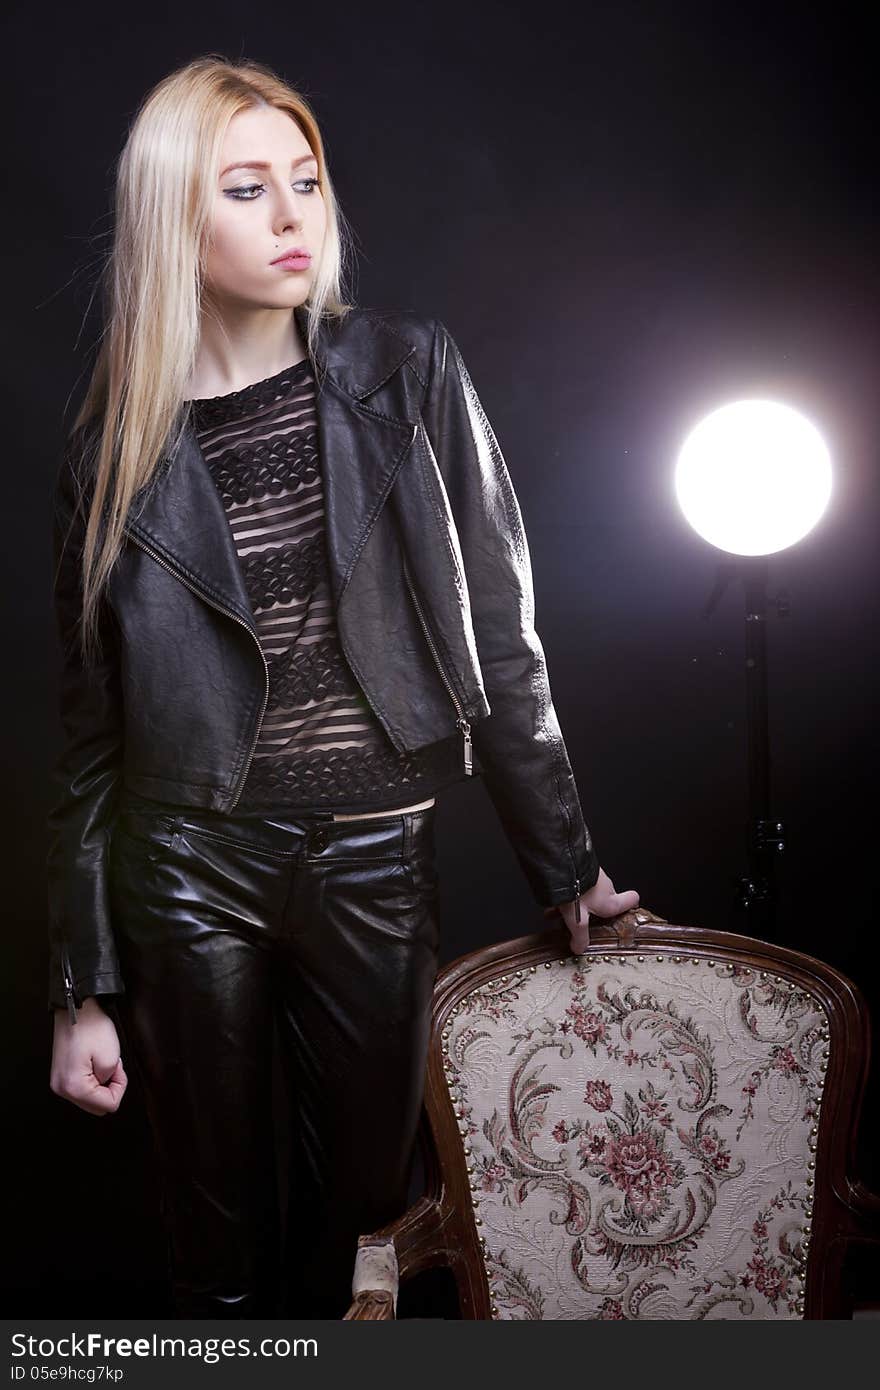 blonde next to a vintage chair on a black background studio shot. blonde next to a vintage chair on a black background studio shot